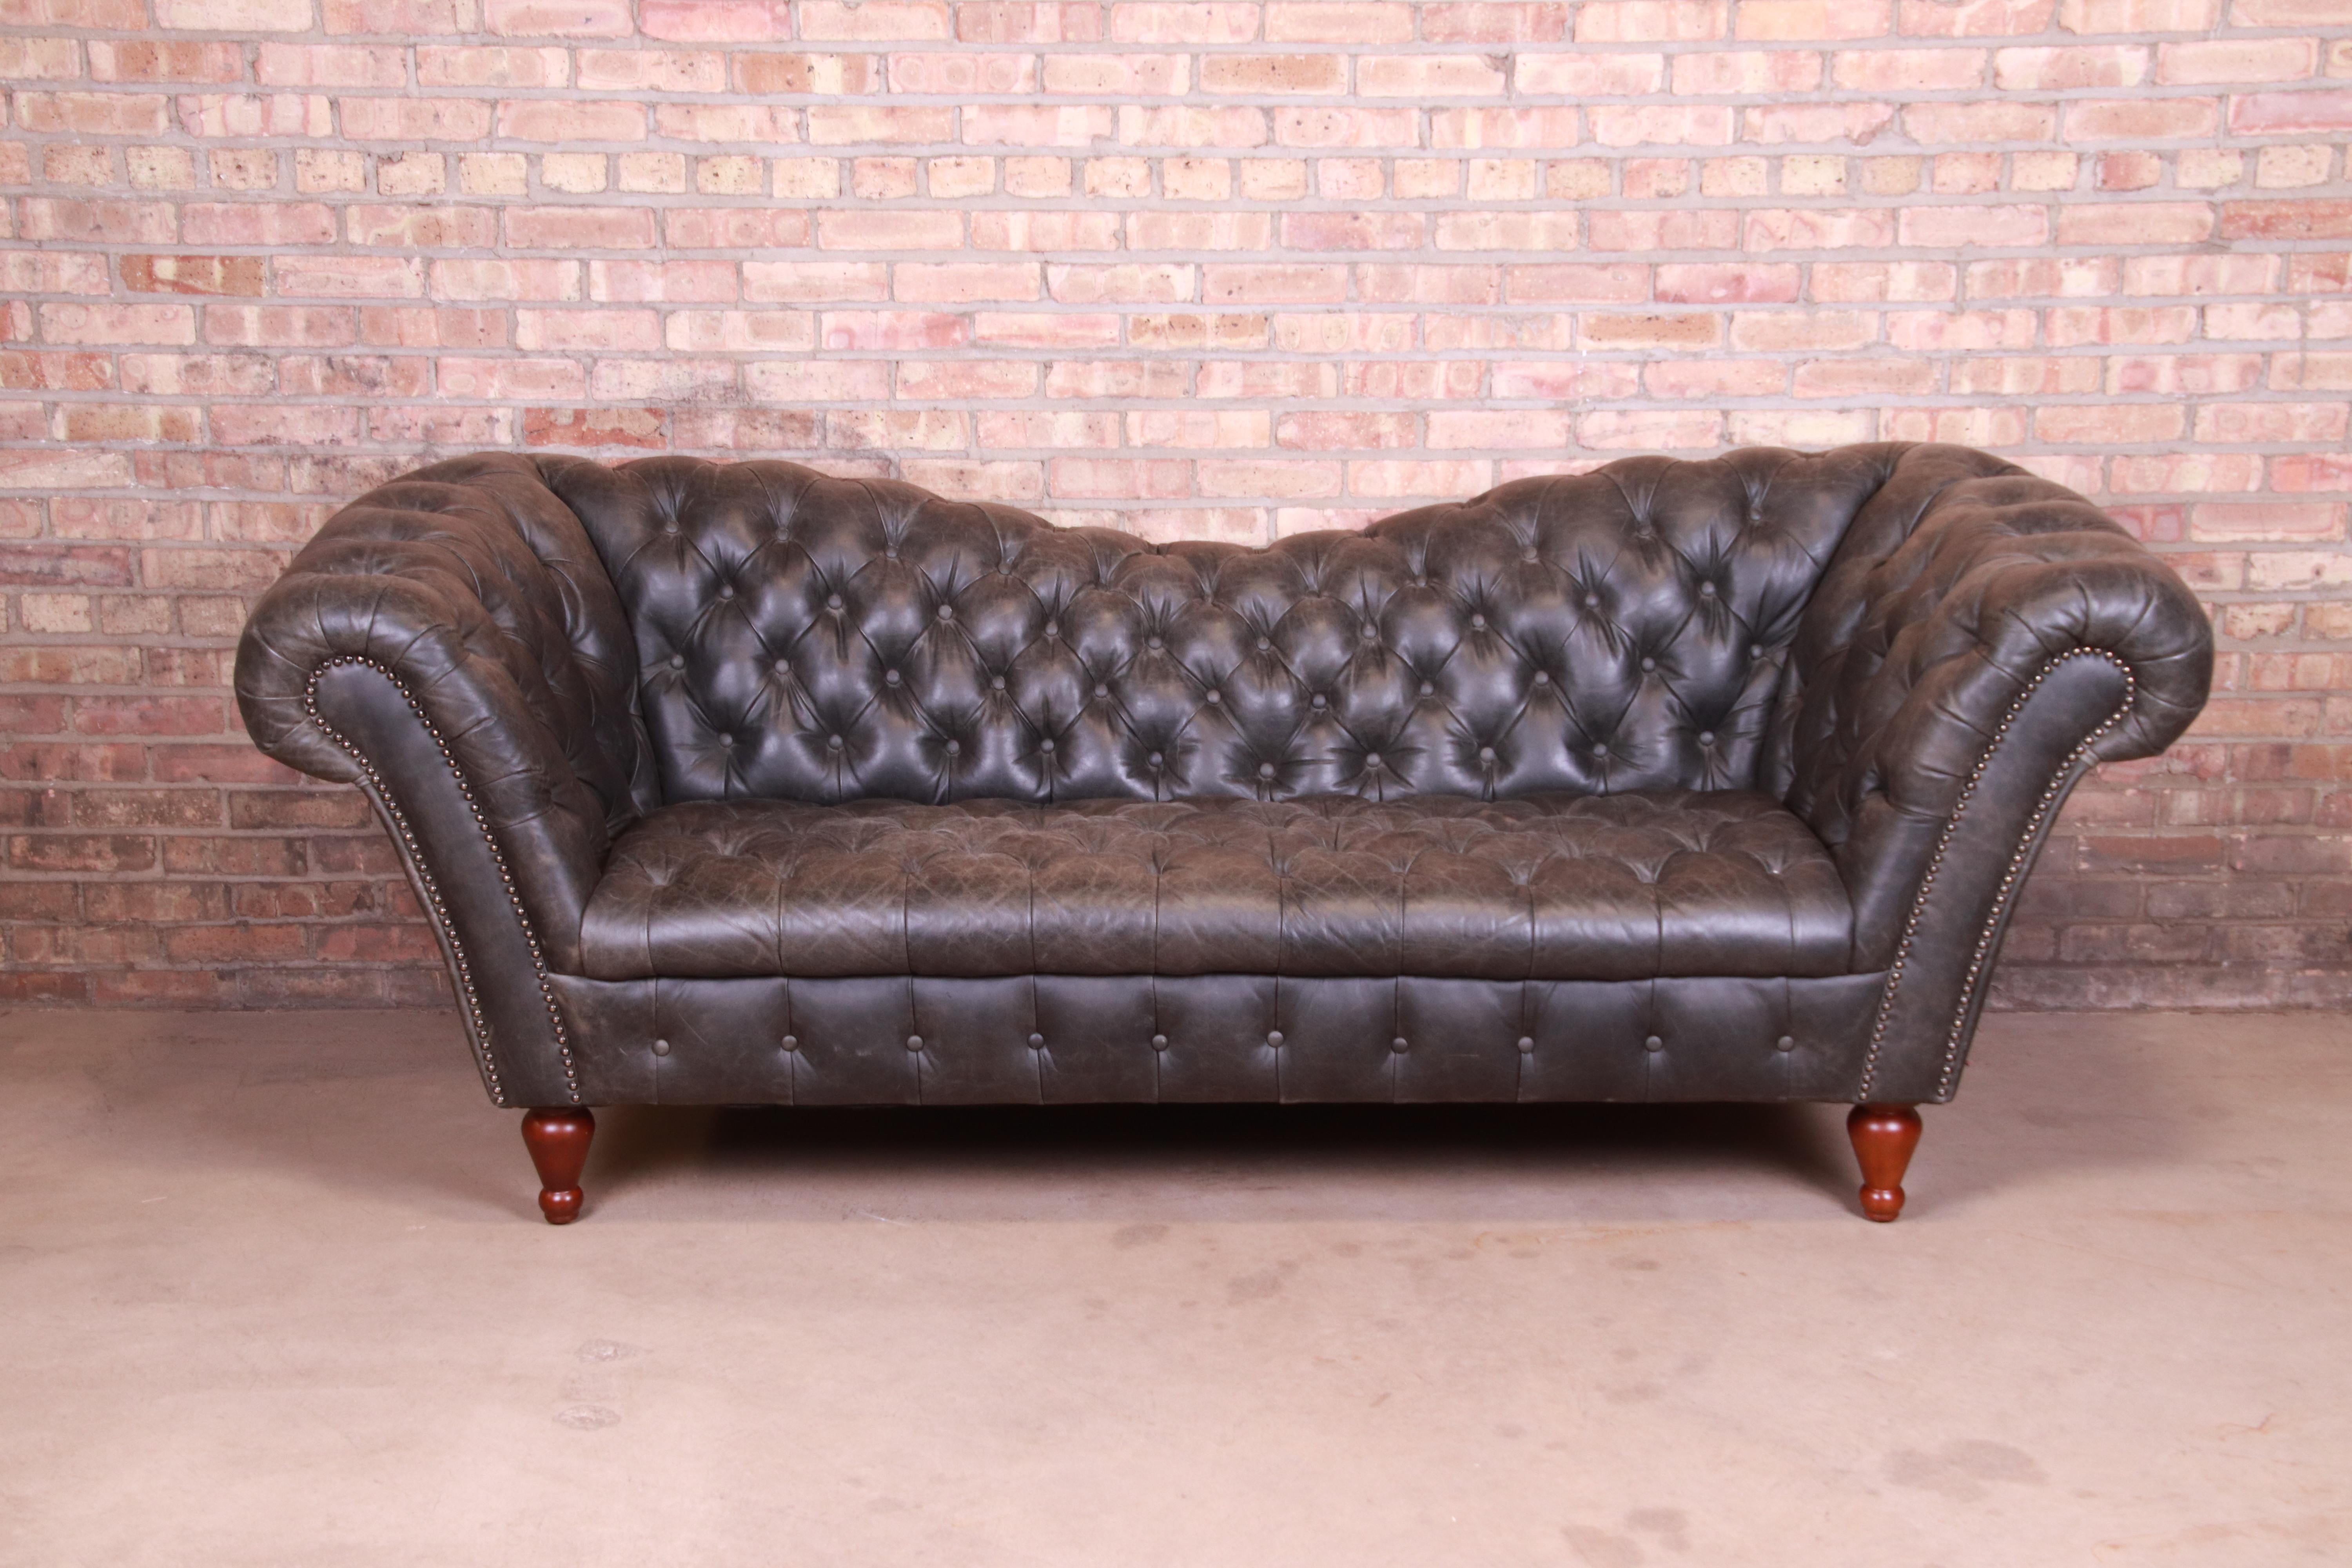 A stunning vintage reverse camelback Chesterfield sofa

Retailed by Neiman Marcus, Chicago

20th century

Tufted charcoal gray leather, with turned mahogany feet.

Measures: 92